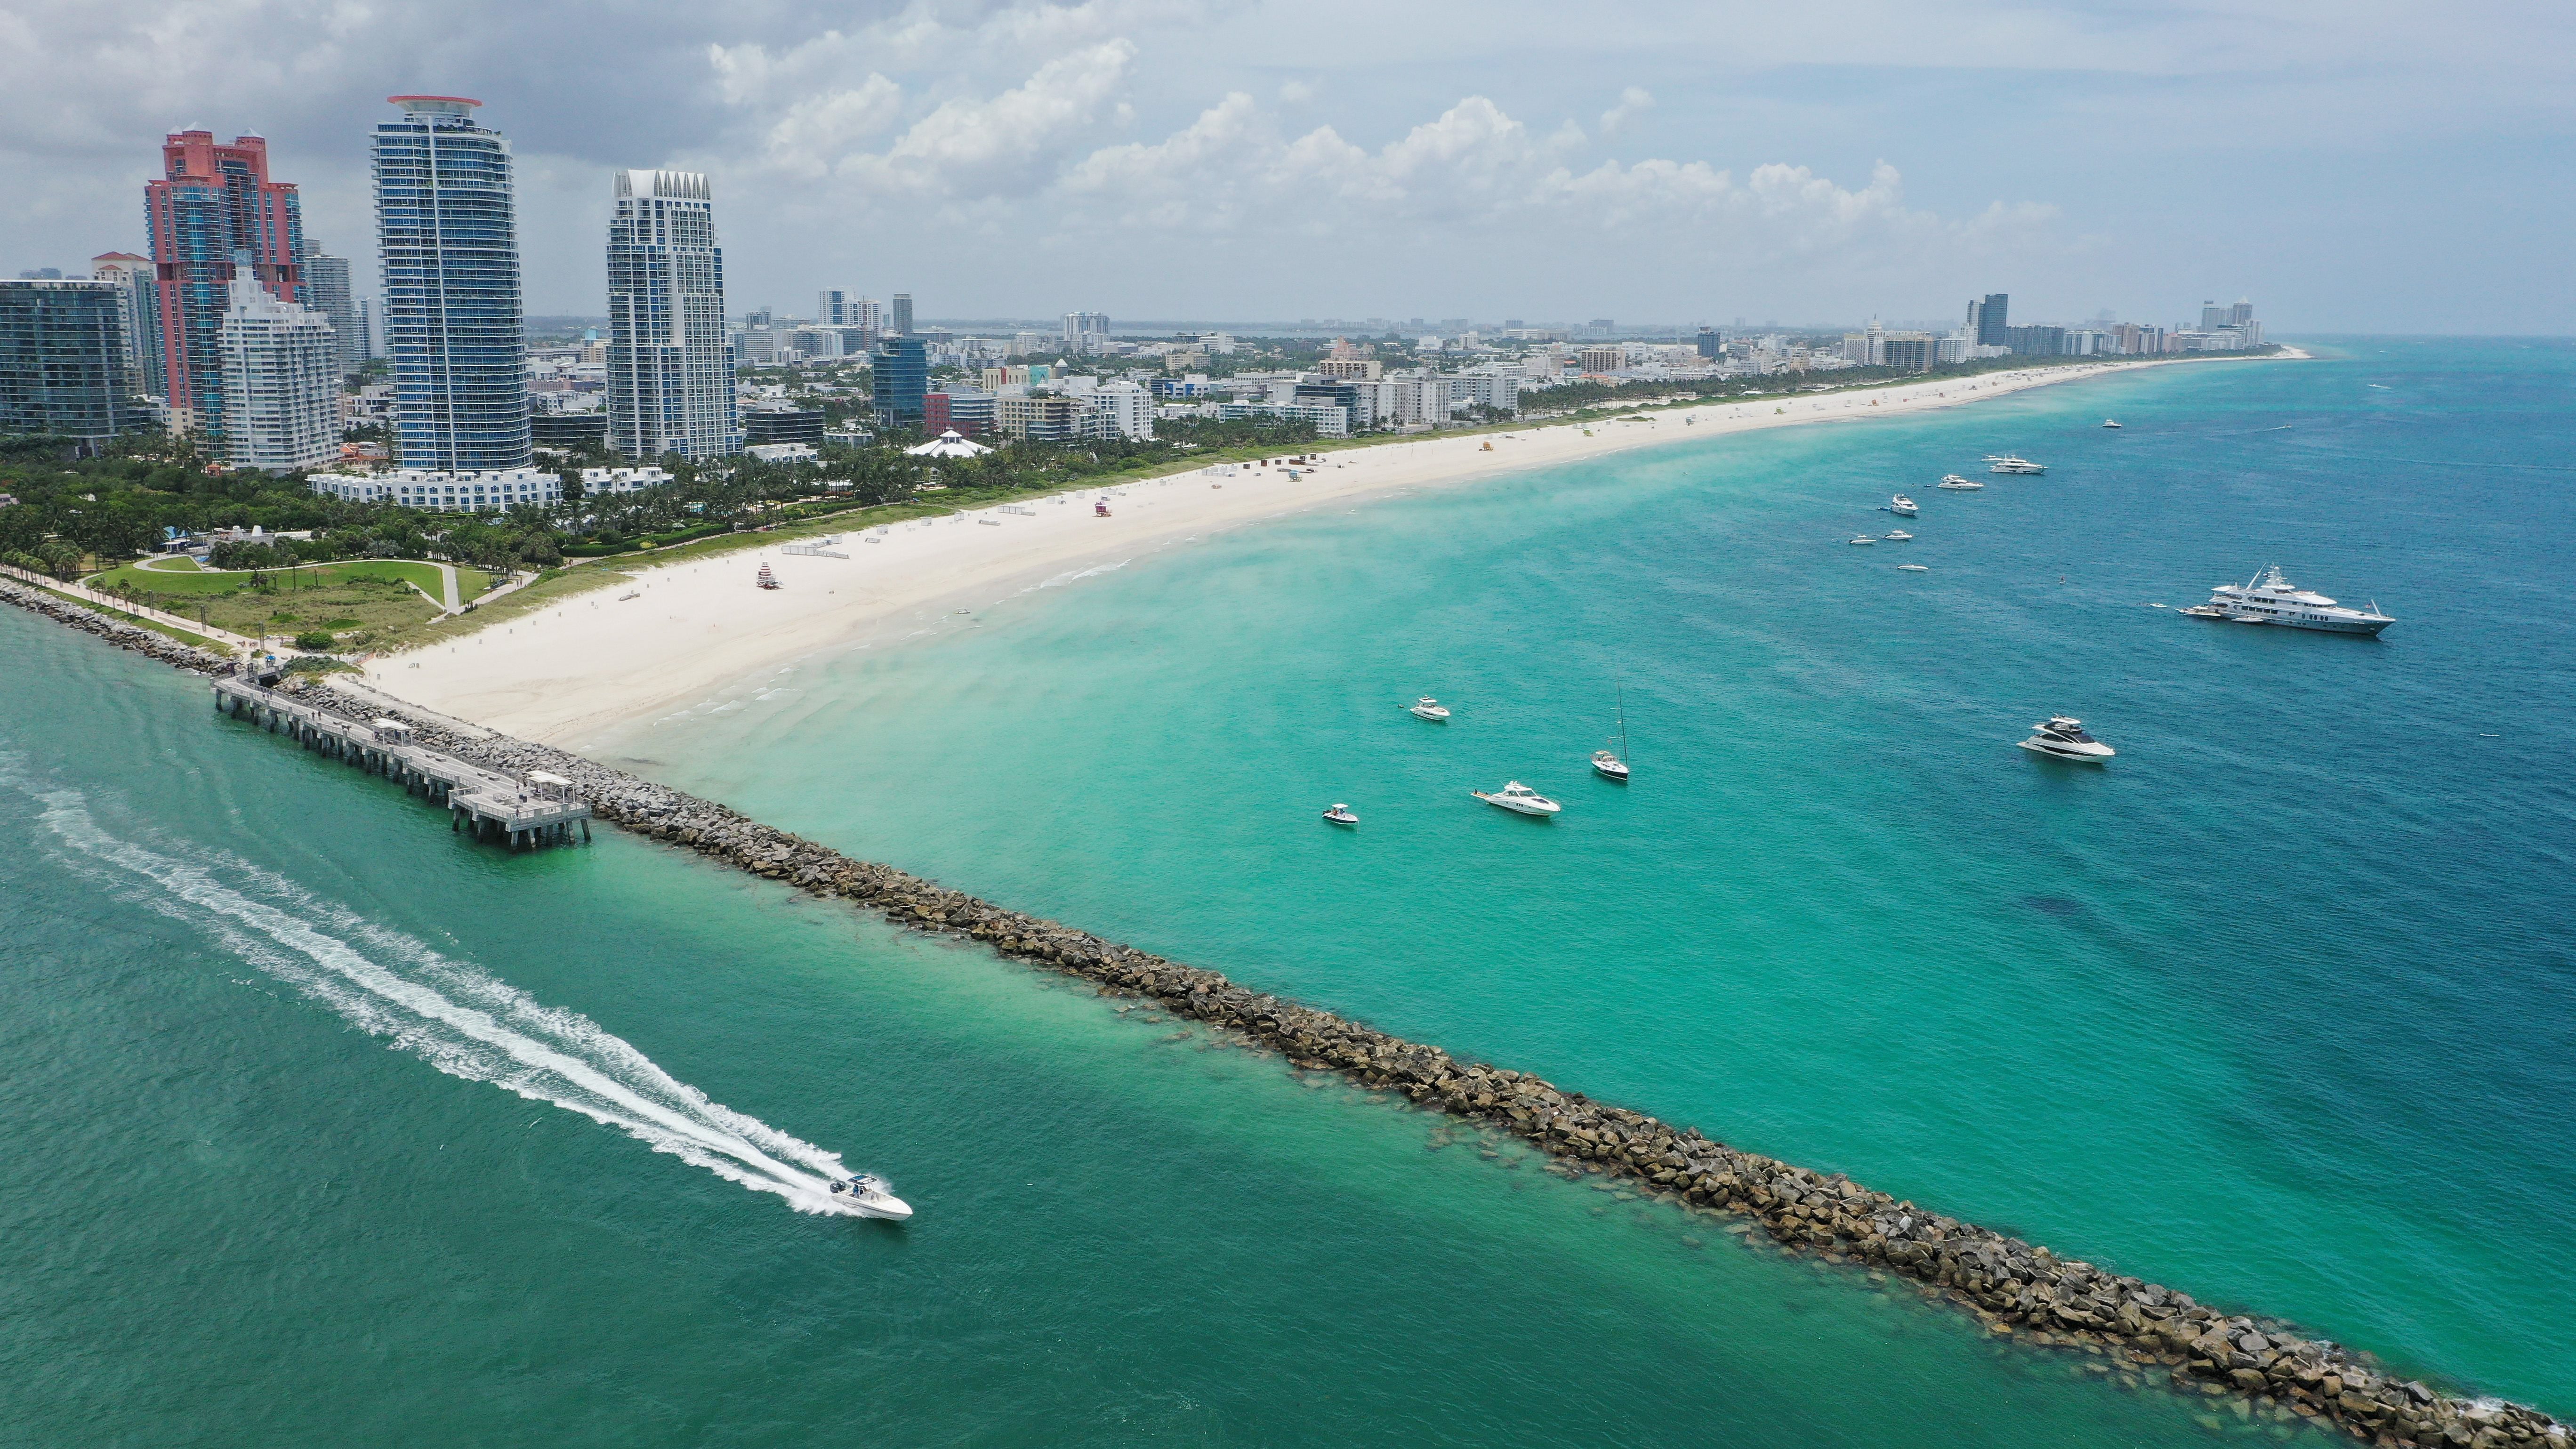 Boats are anchored off the South Beach neighborhood of Miami Beach